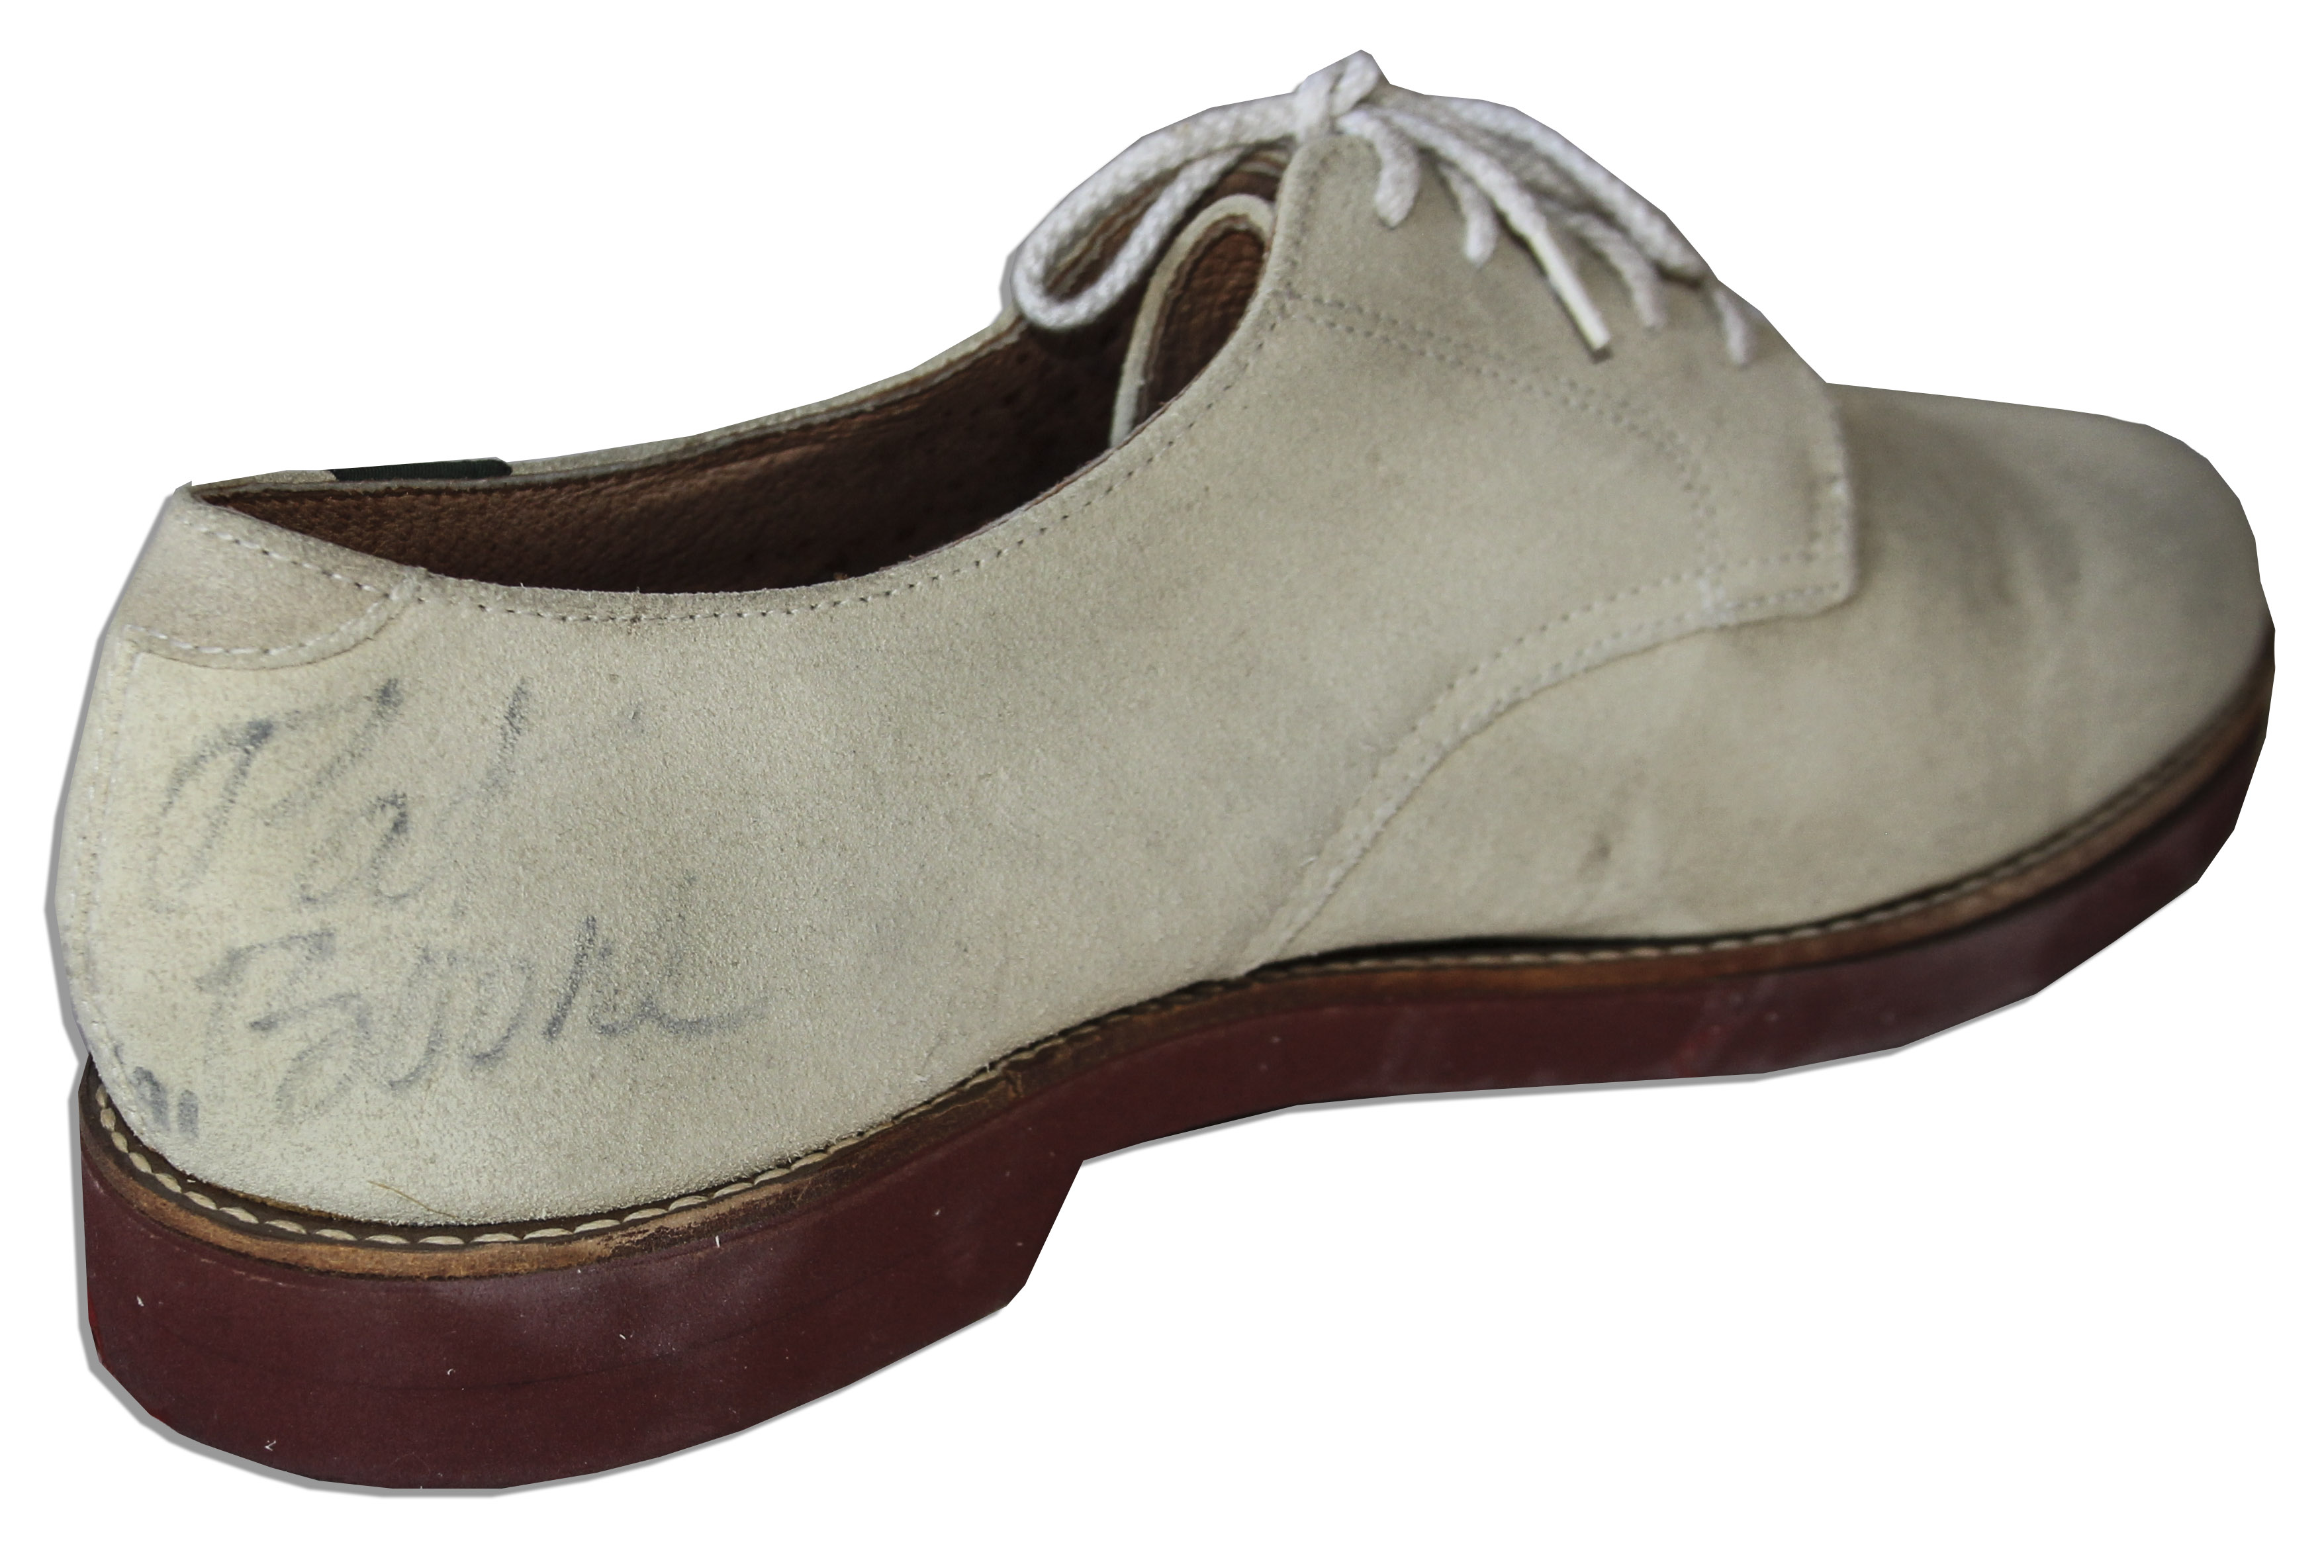 pat boone white shoes